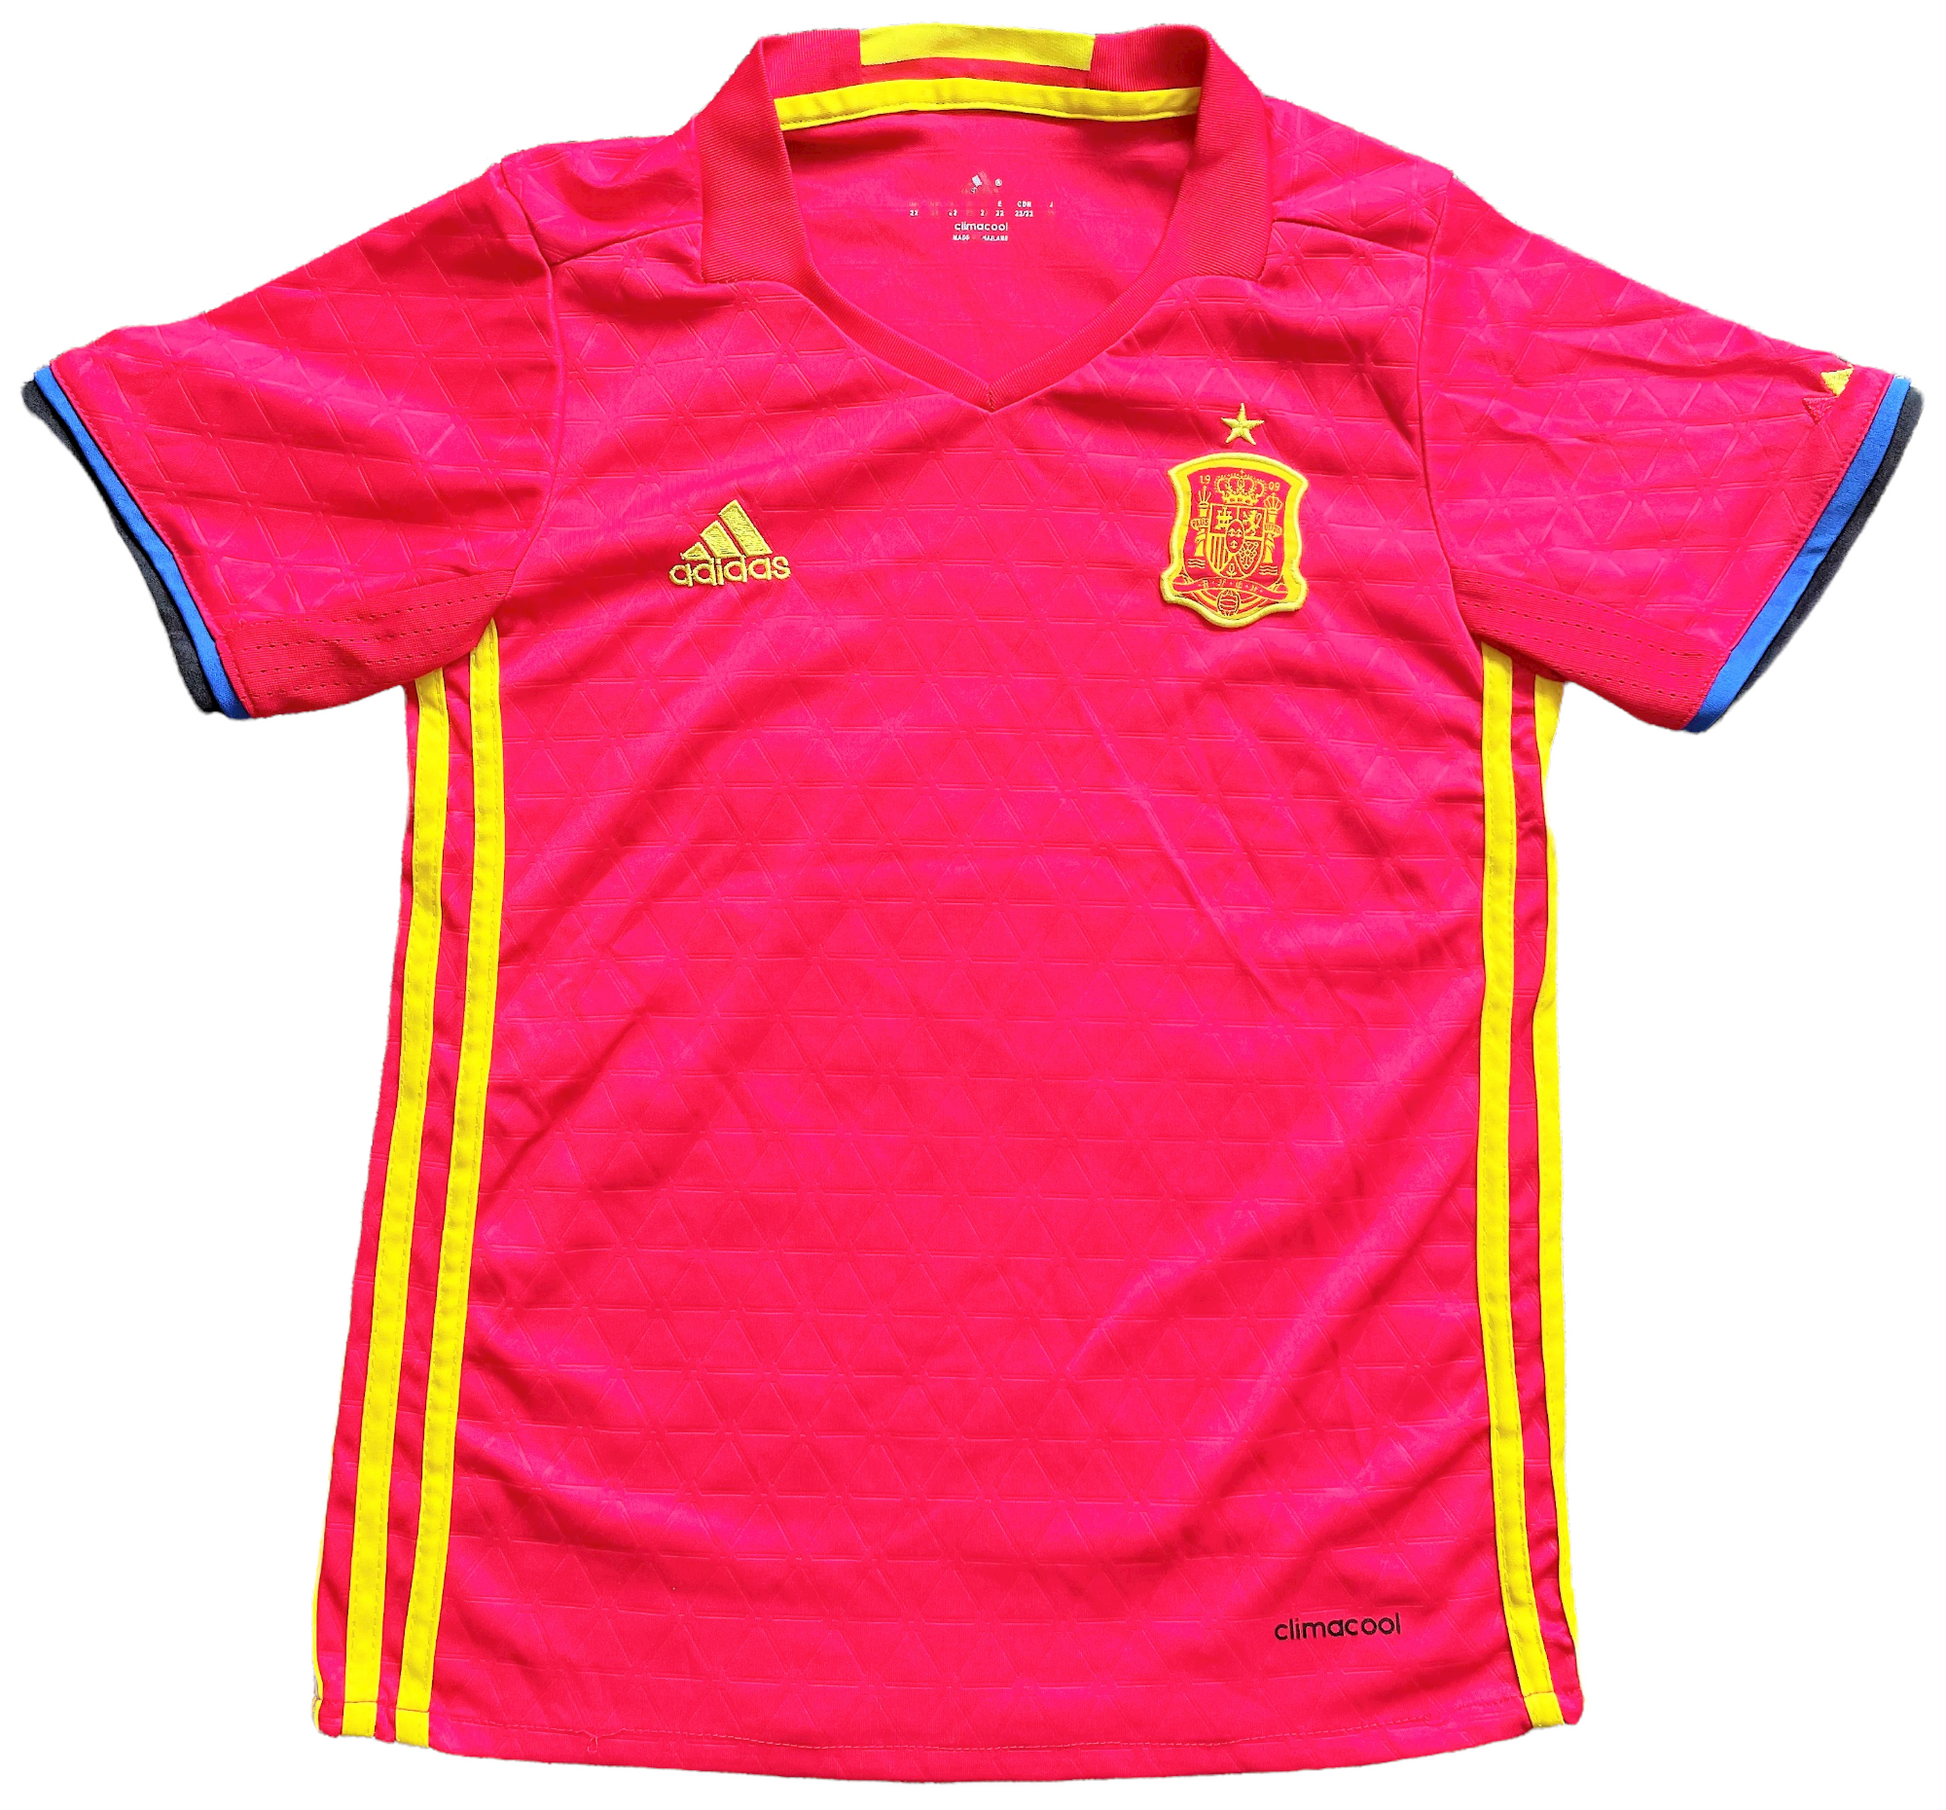 2016-17 Spain Home Shirt (very good) Childs size 22, 8 years